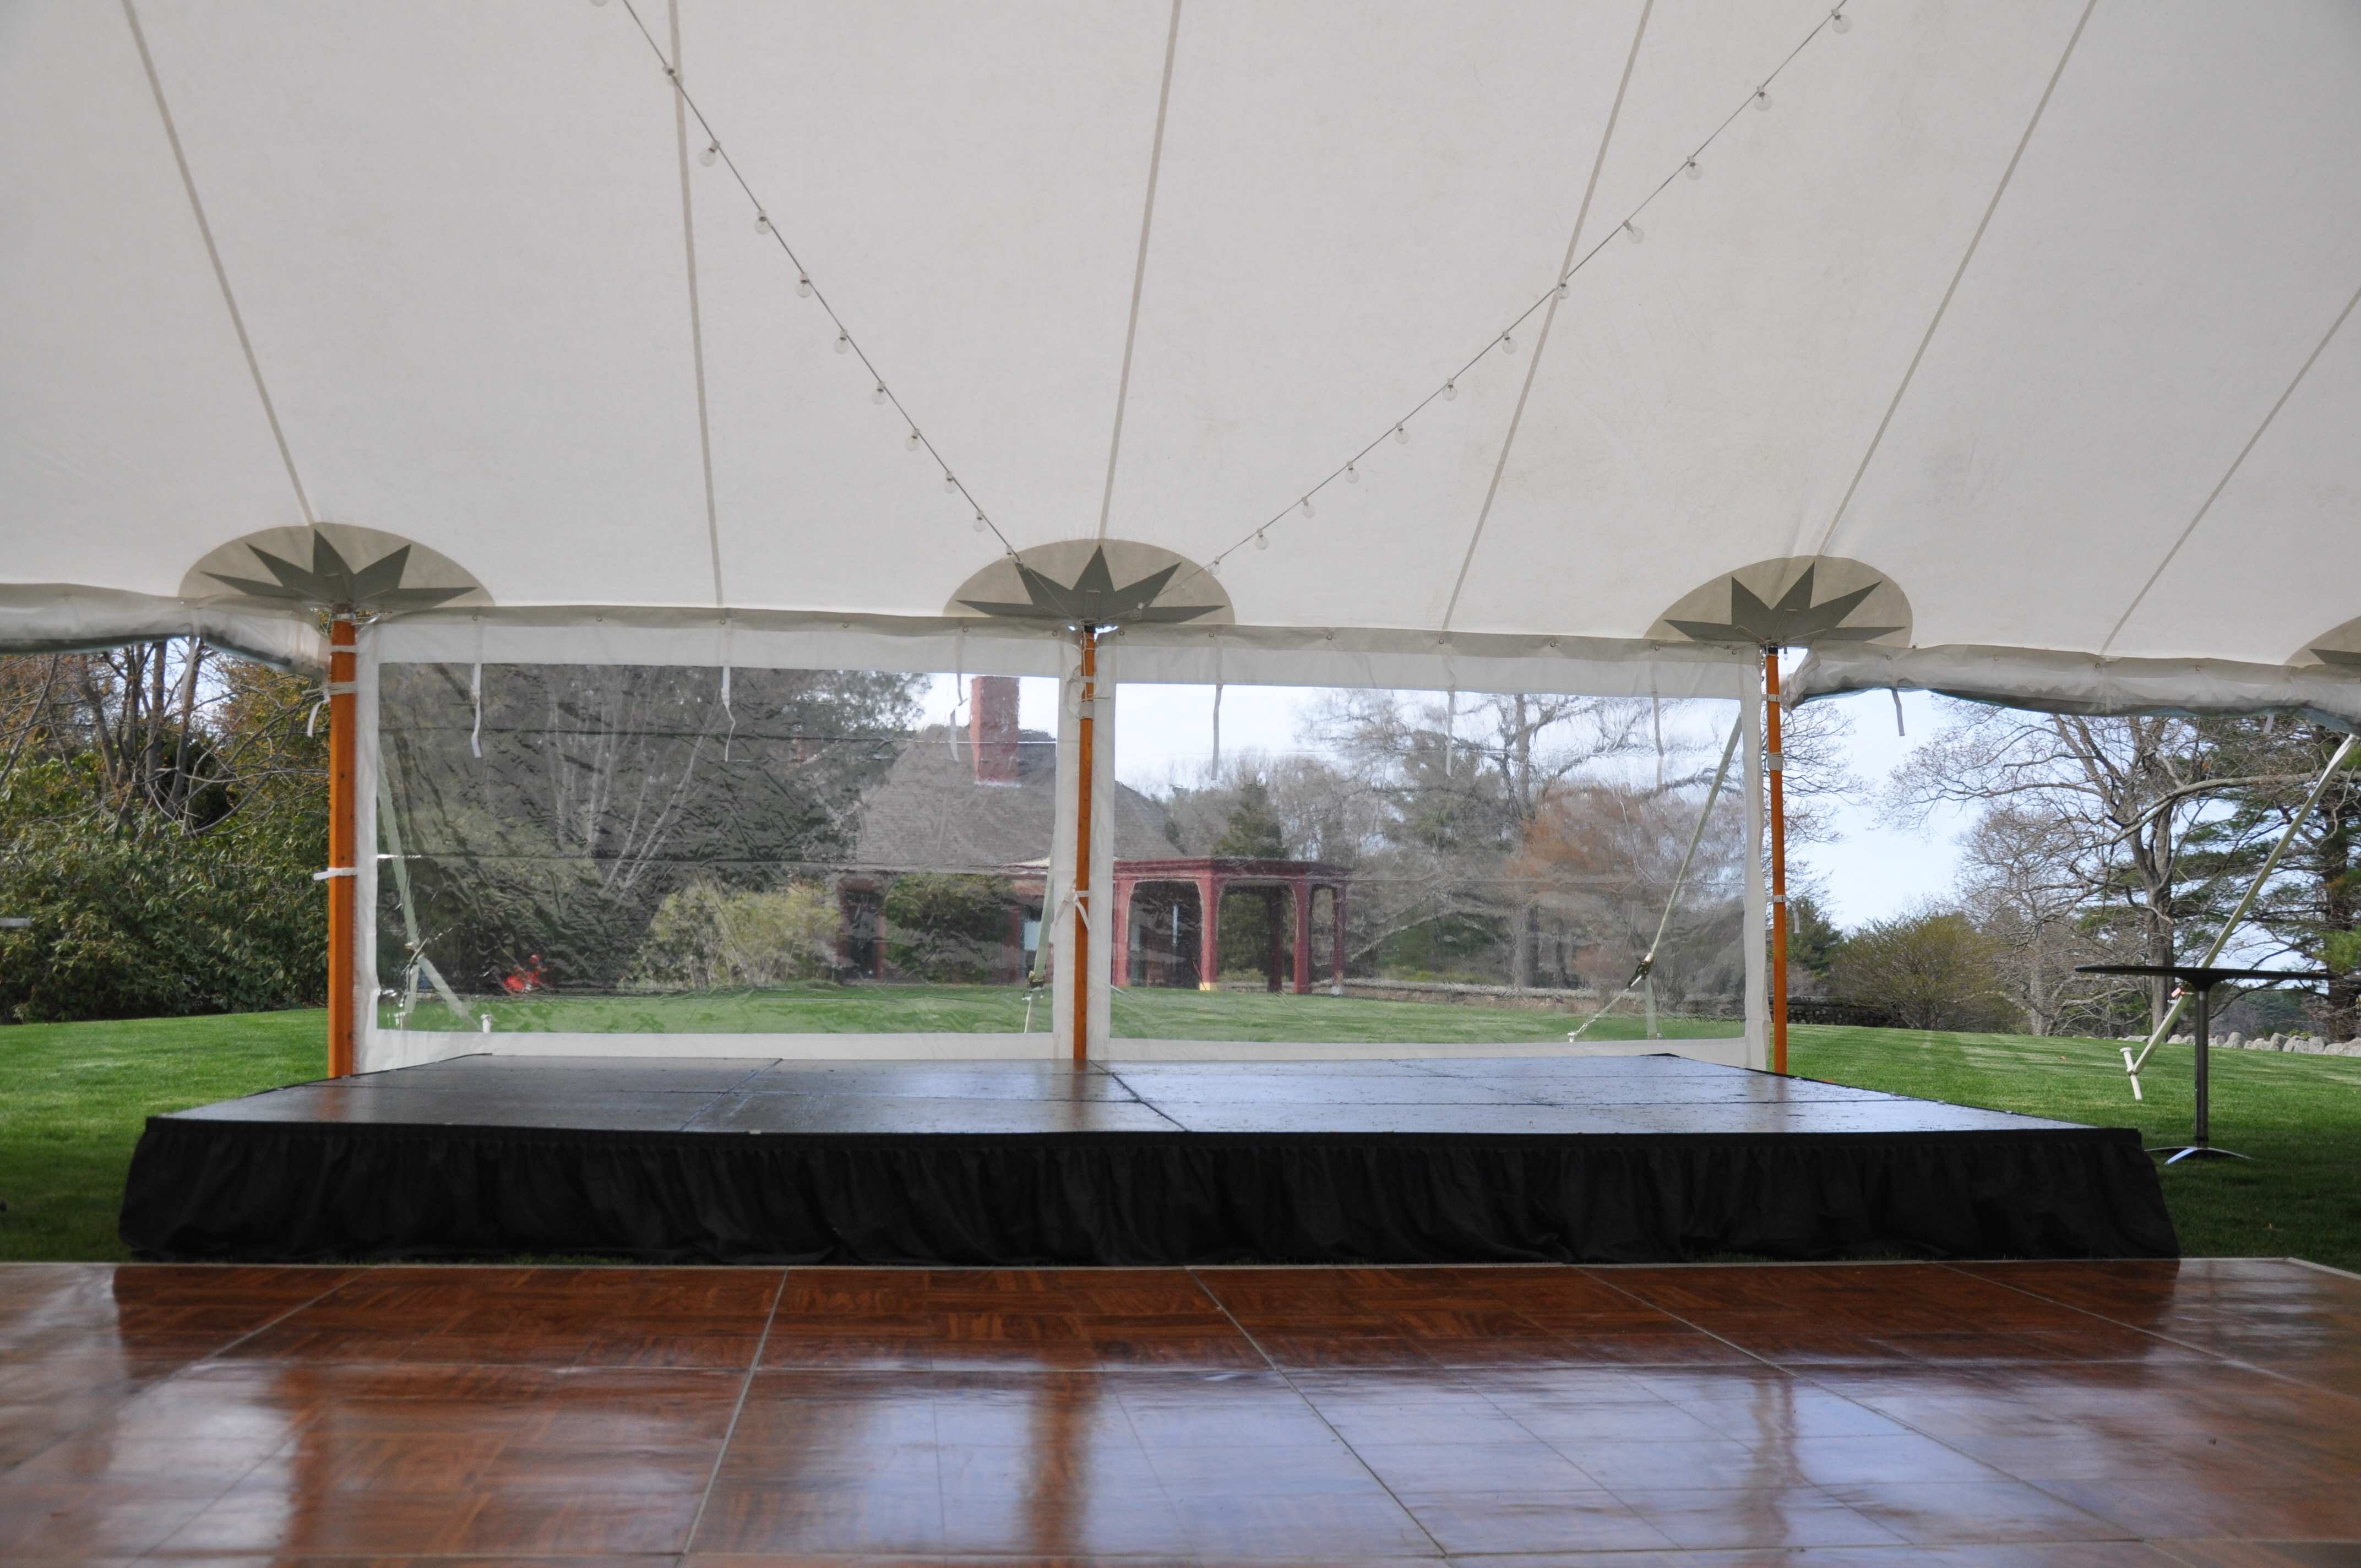 Stage and Parquet Dance Floor in a Tidewater Sailcloth Tent